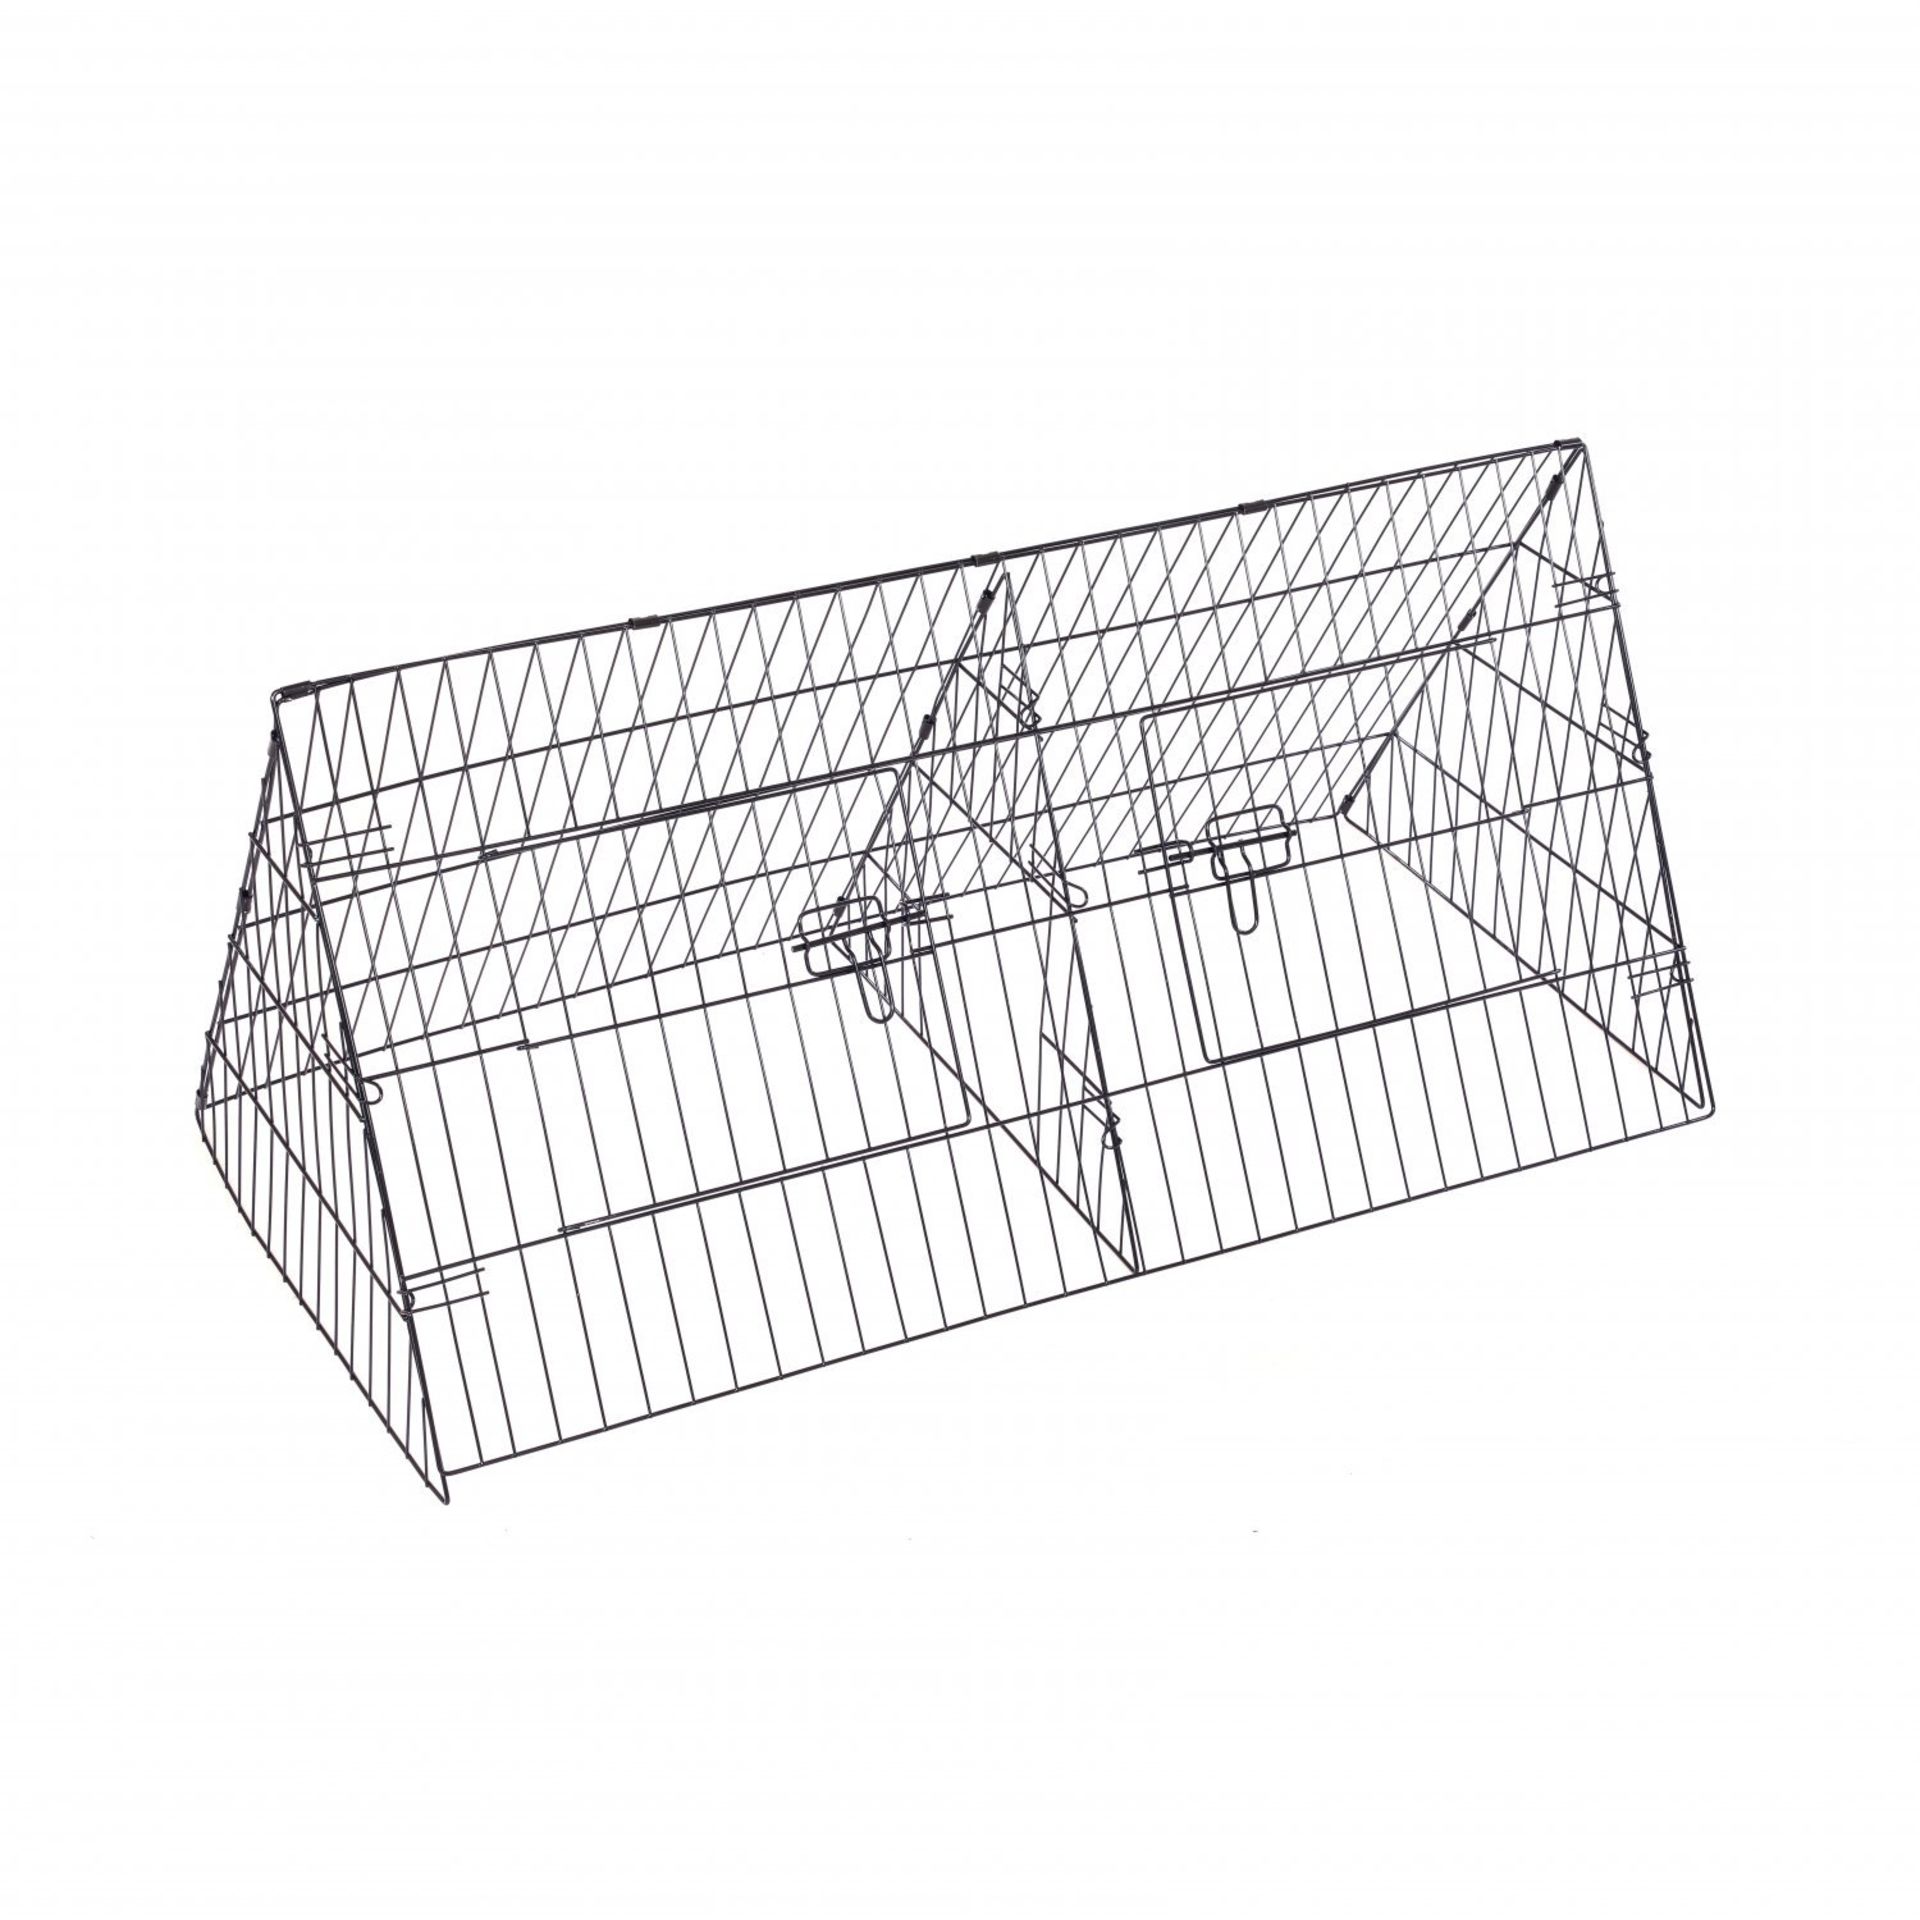 (ZP47) 48" Metal Triangle Rabbit Guinea Pig Pet Hutch Run Cage Playpen The triangle hutch ... - Image 2 of 2